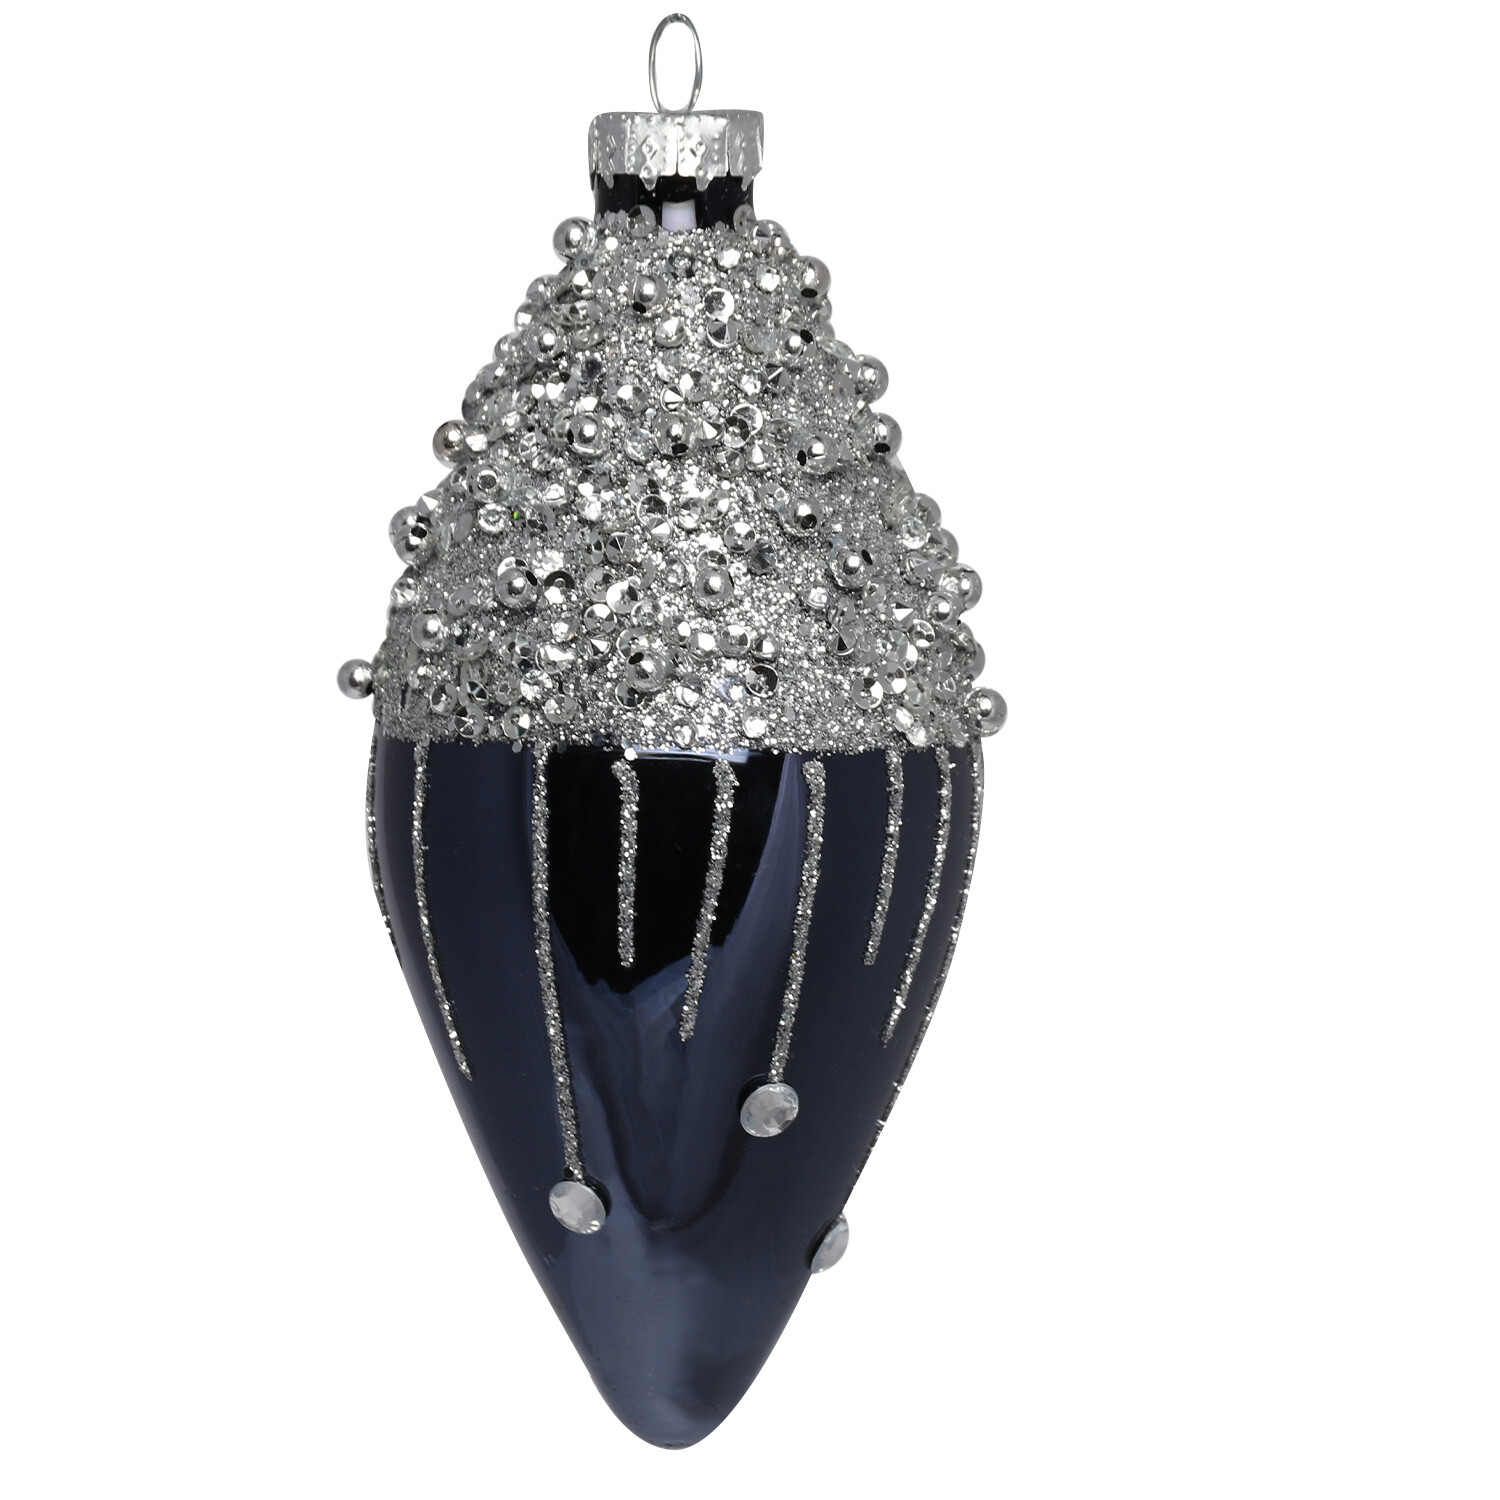 Midnight Fantasy Silver Beaded Bauble Assorted Image 1